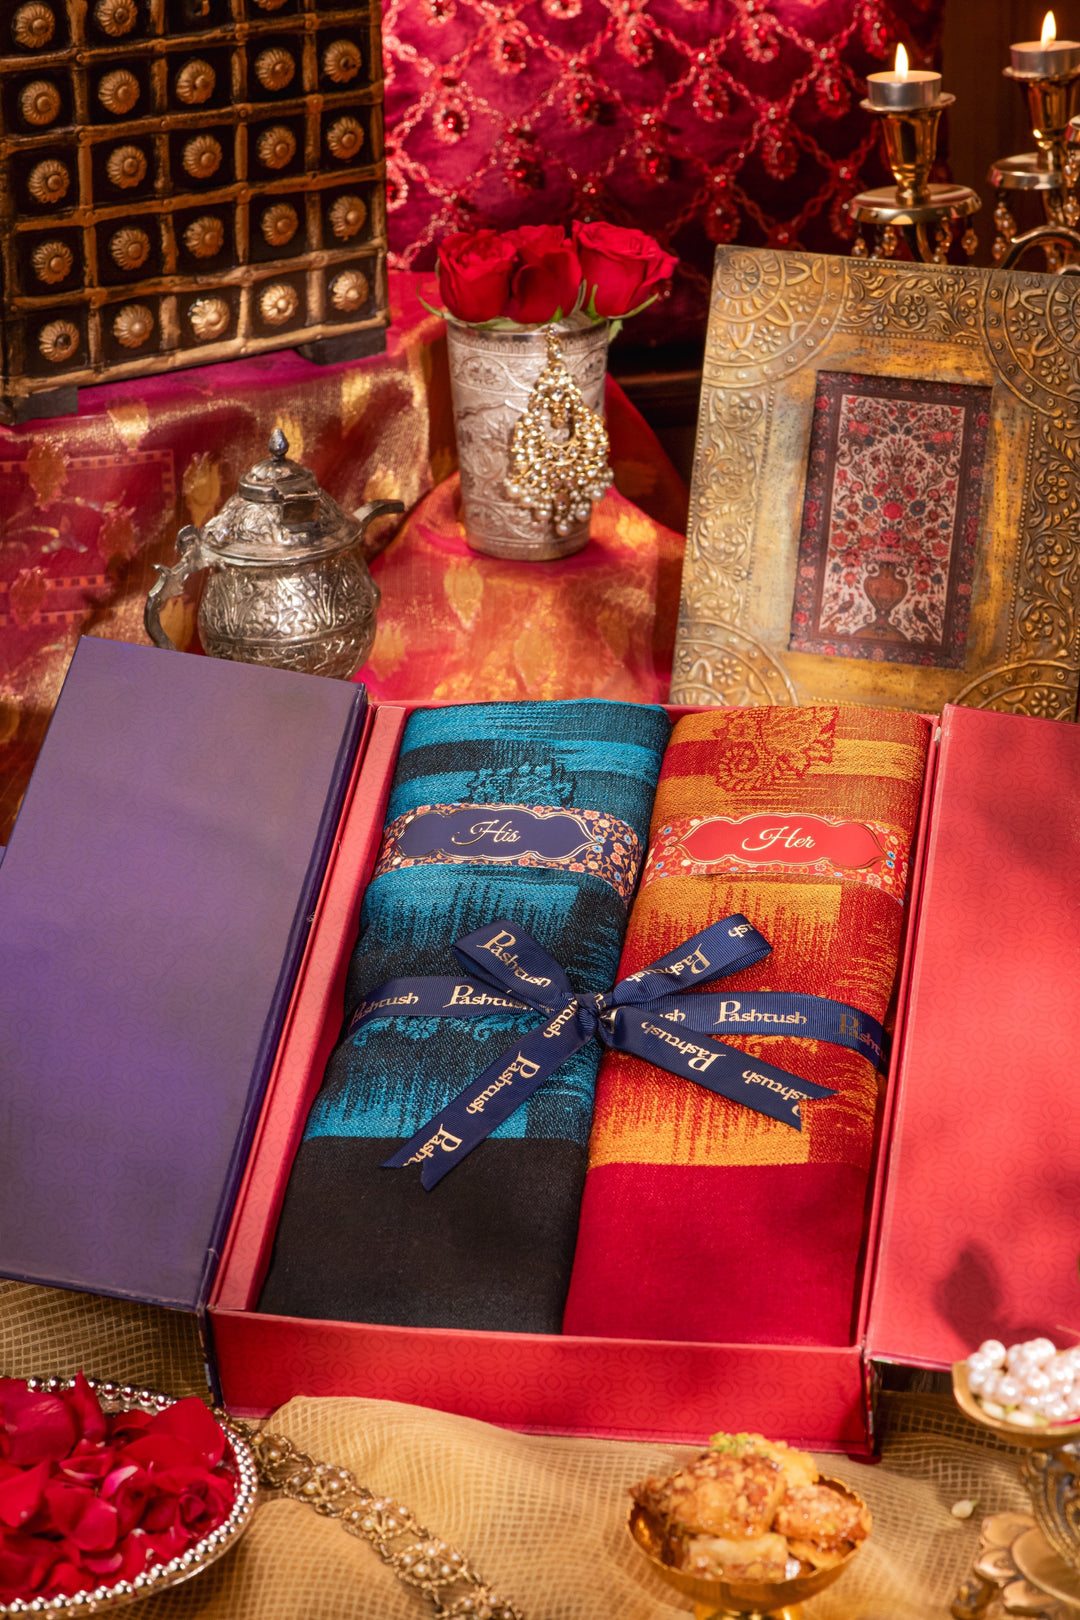 Pashtush India Gift Pack Pashtush His And Her Set Of Ikkat Design Stoles With Premium Gift Box Packaging, Pacific Blue and Maroon